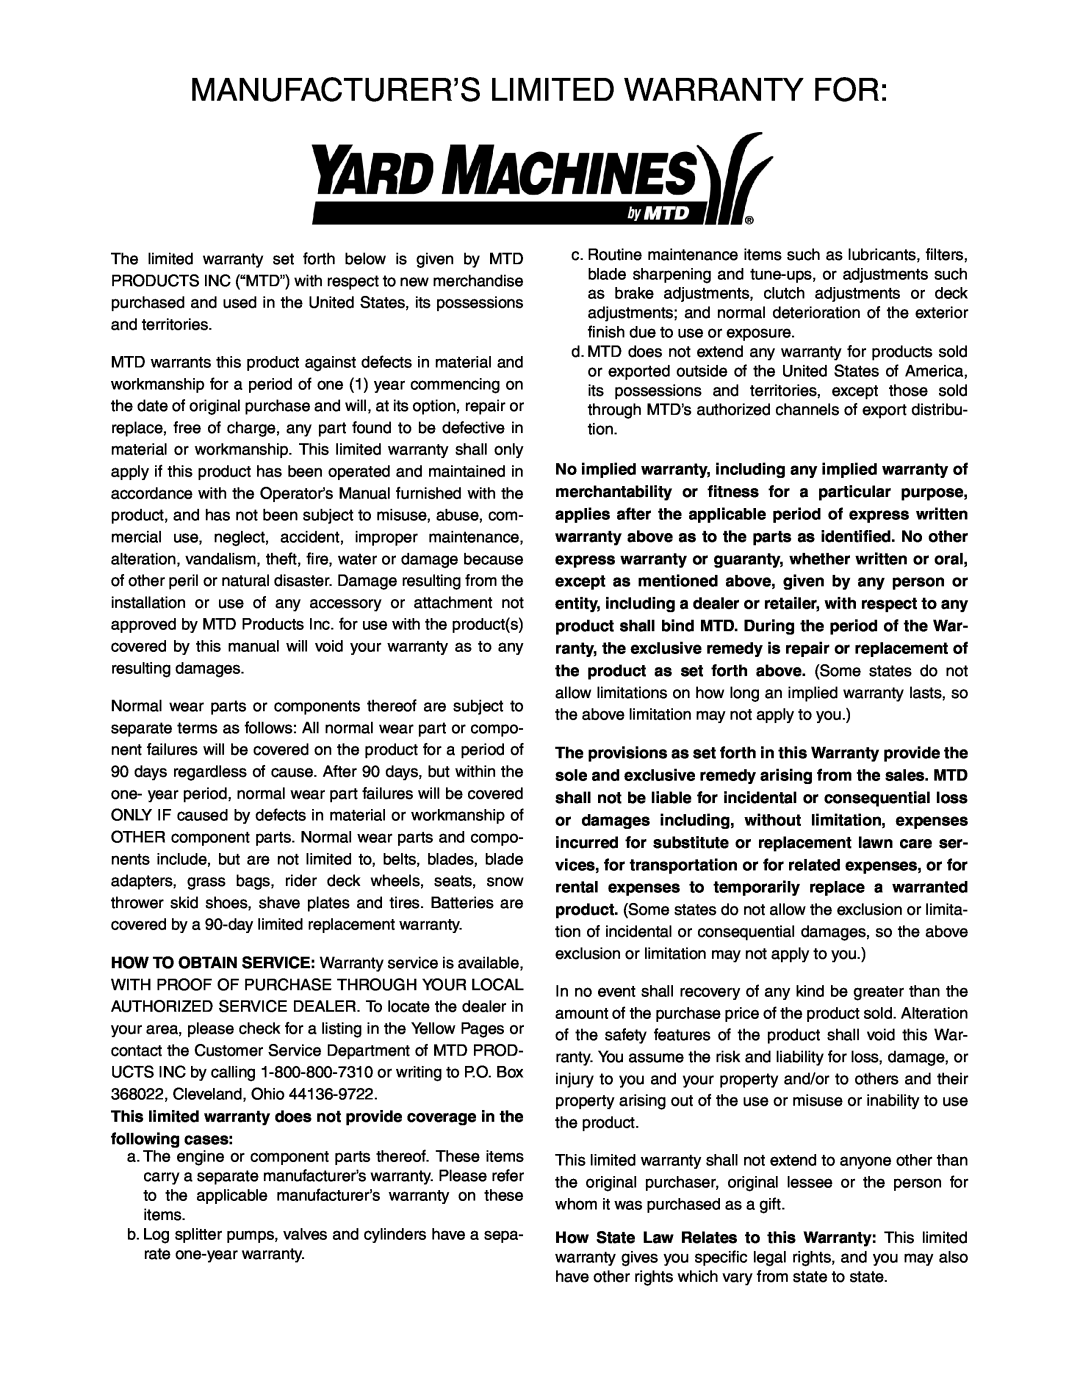 Yard Machines 20 manual Manufacturer’S Limited Warranty For 